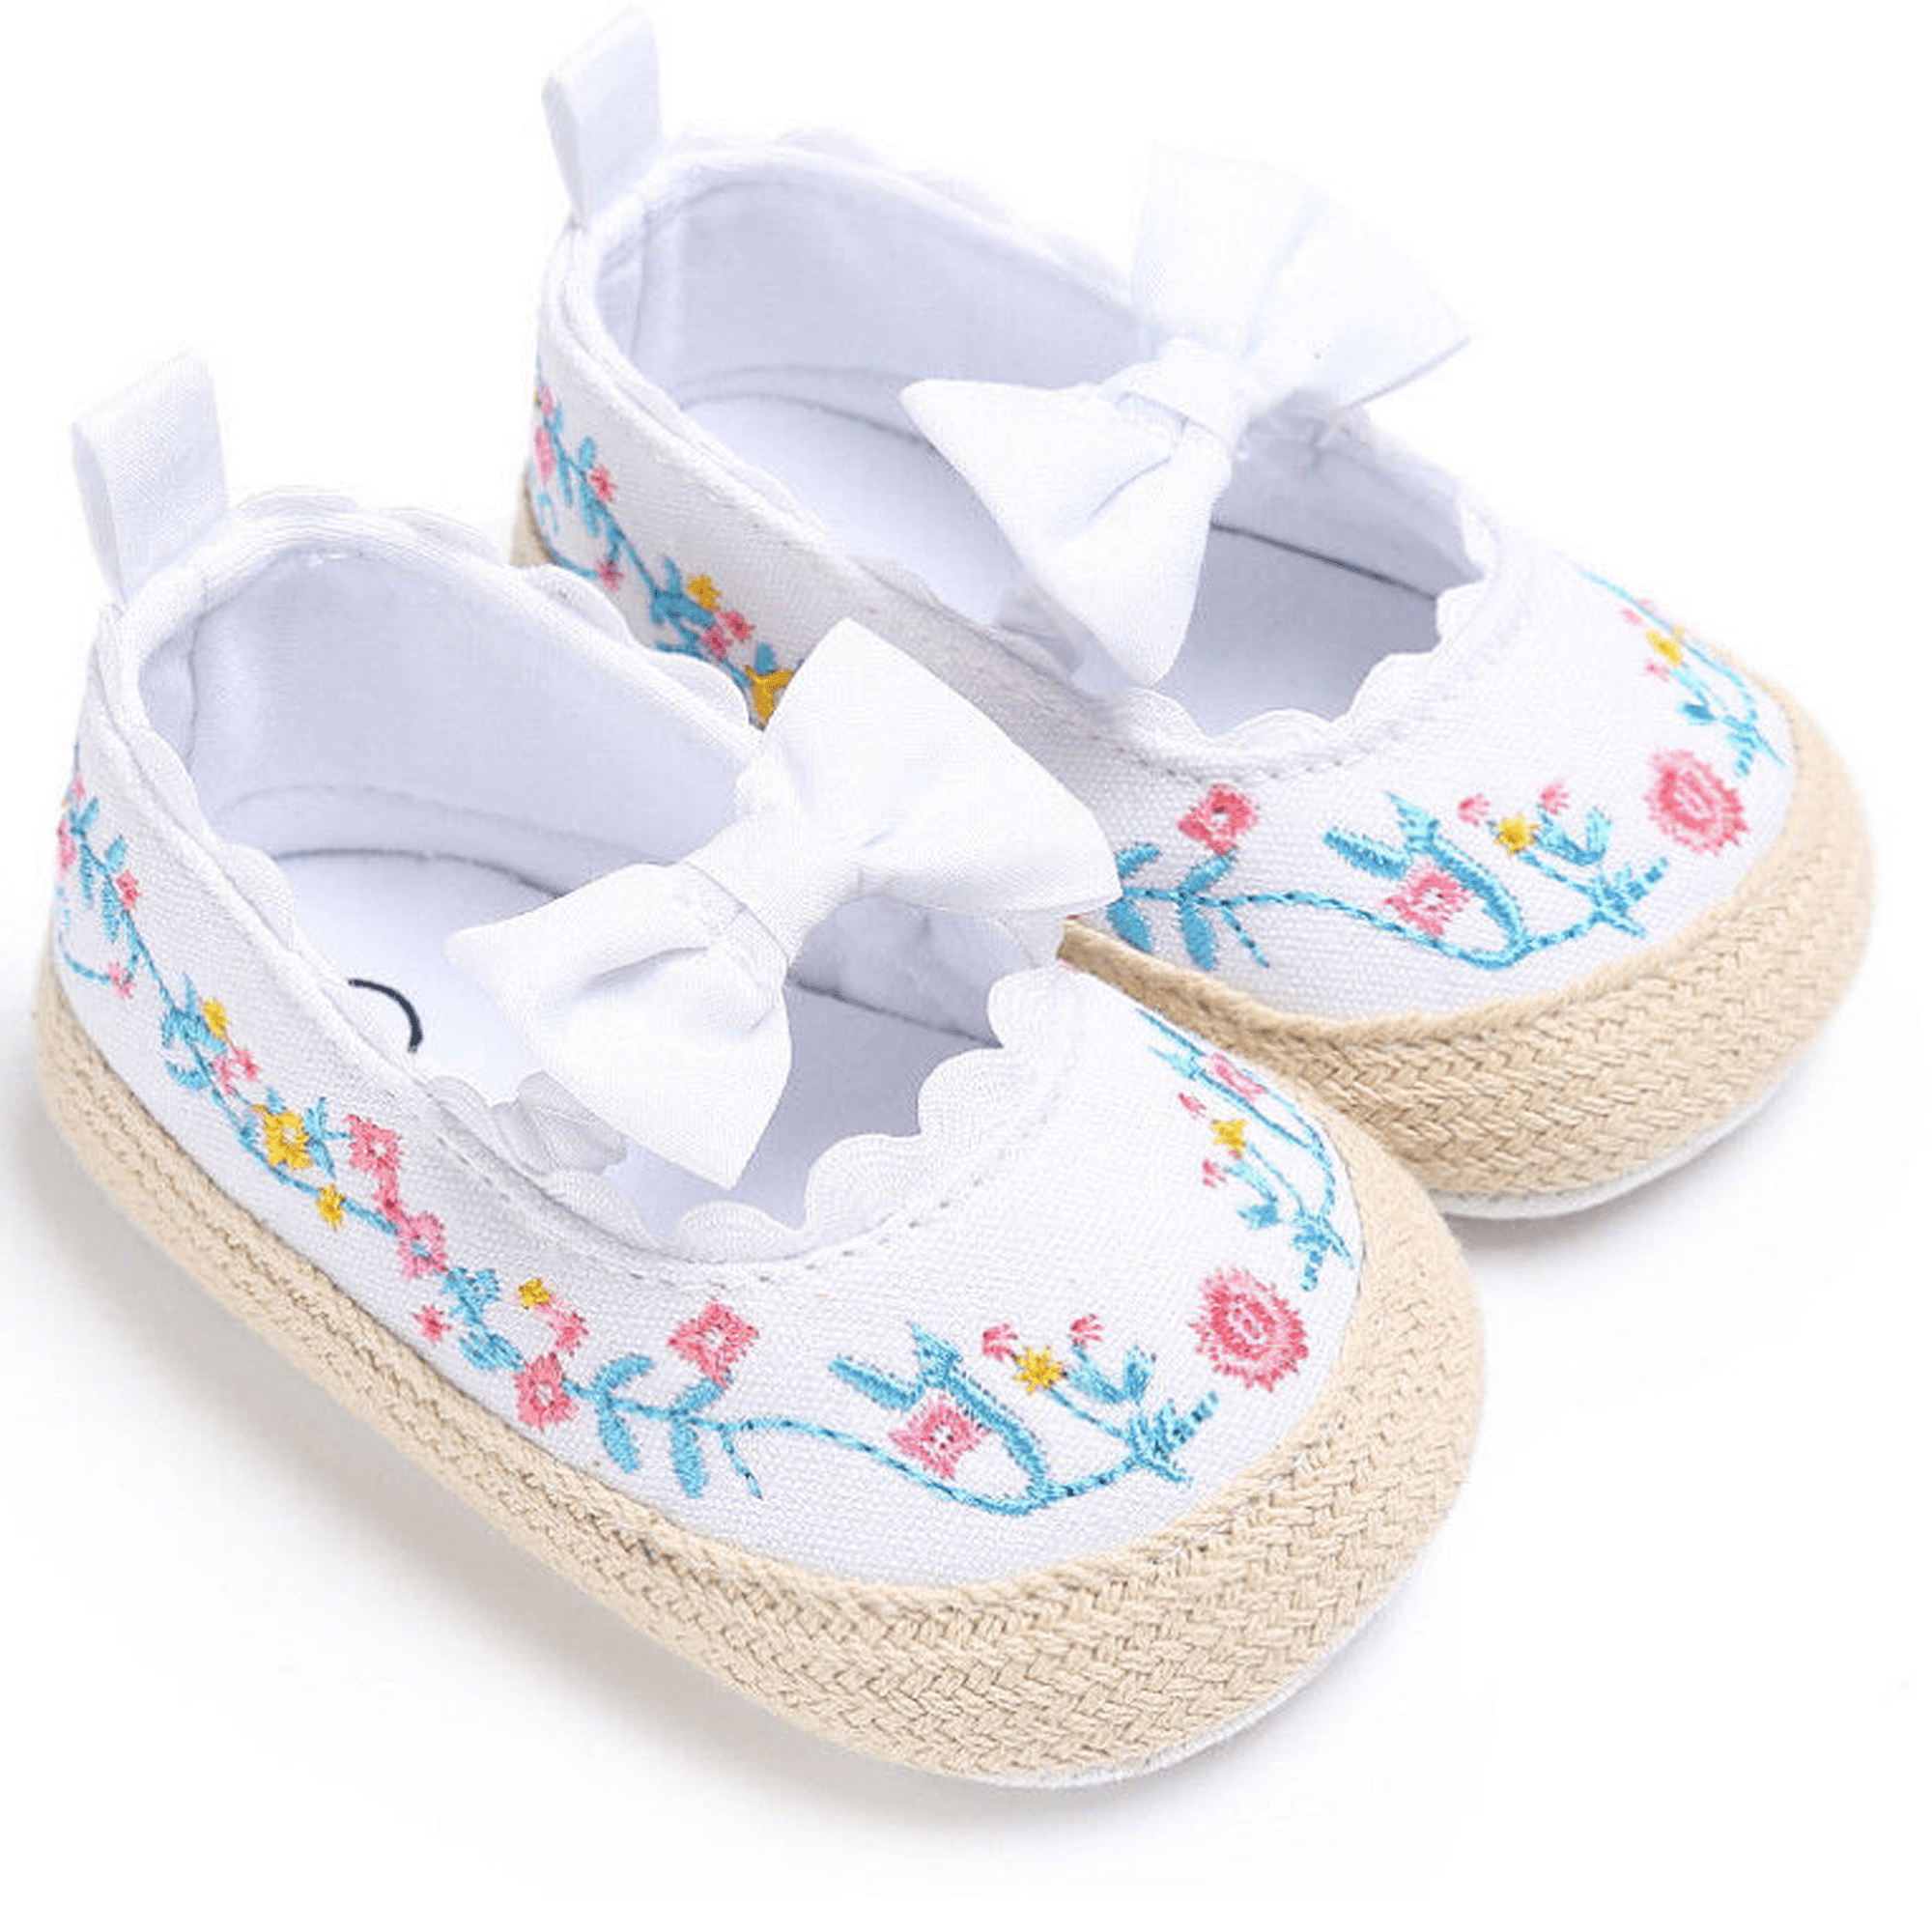 MrToNo First Walking Shoes Crawling Shoes Girls Boys Canvas Baby Shoes 0-6 Months 6-12 Months 12-18 Months Non-Slip Lightweight Learning Running Shoes Baby Slippers 